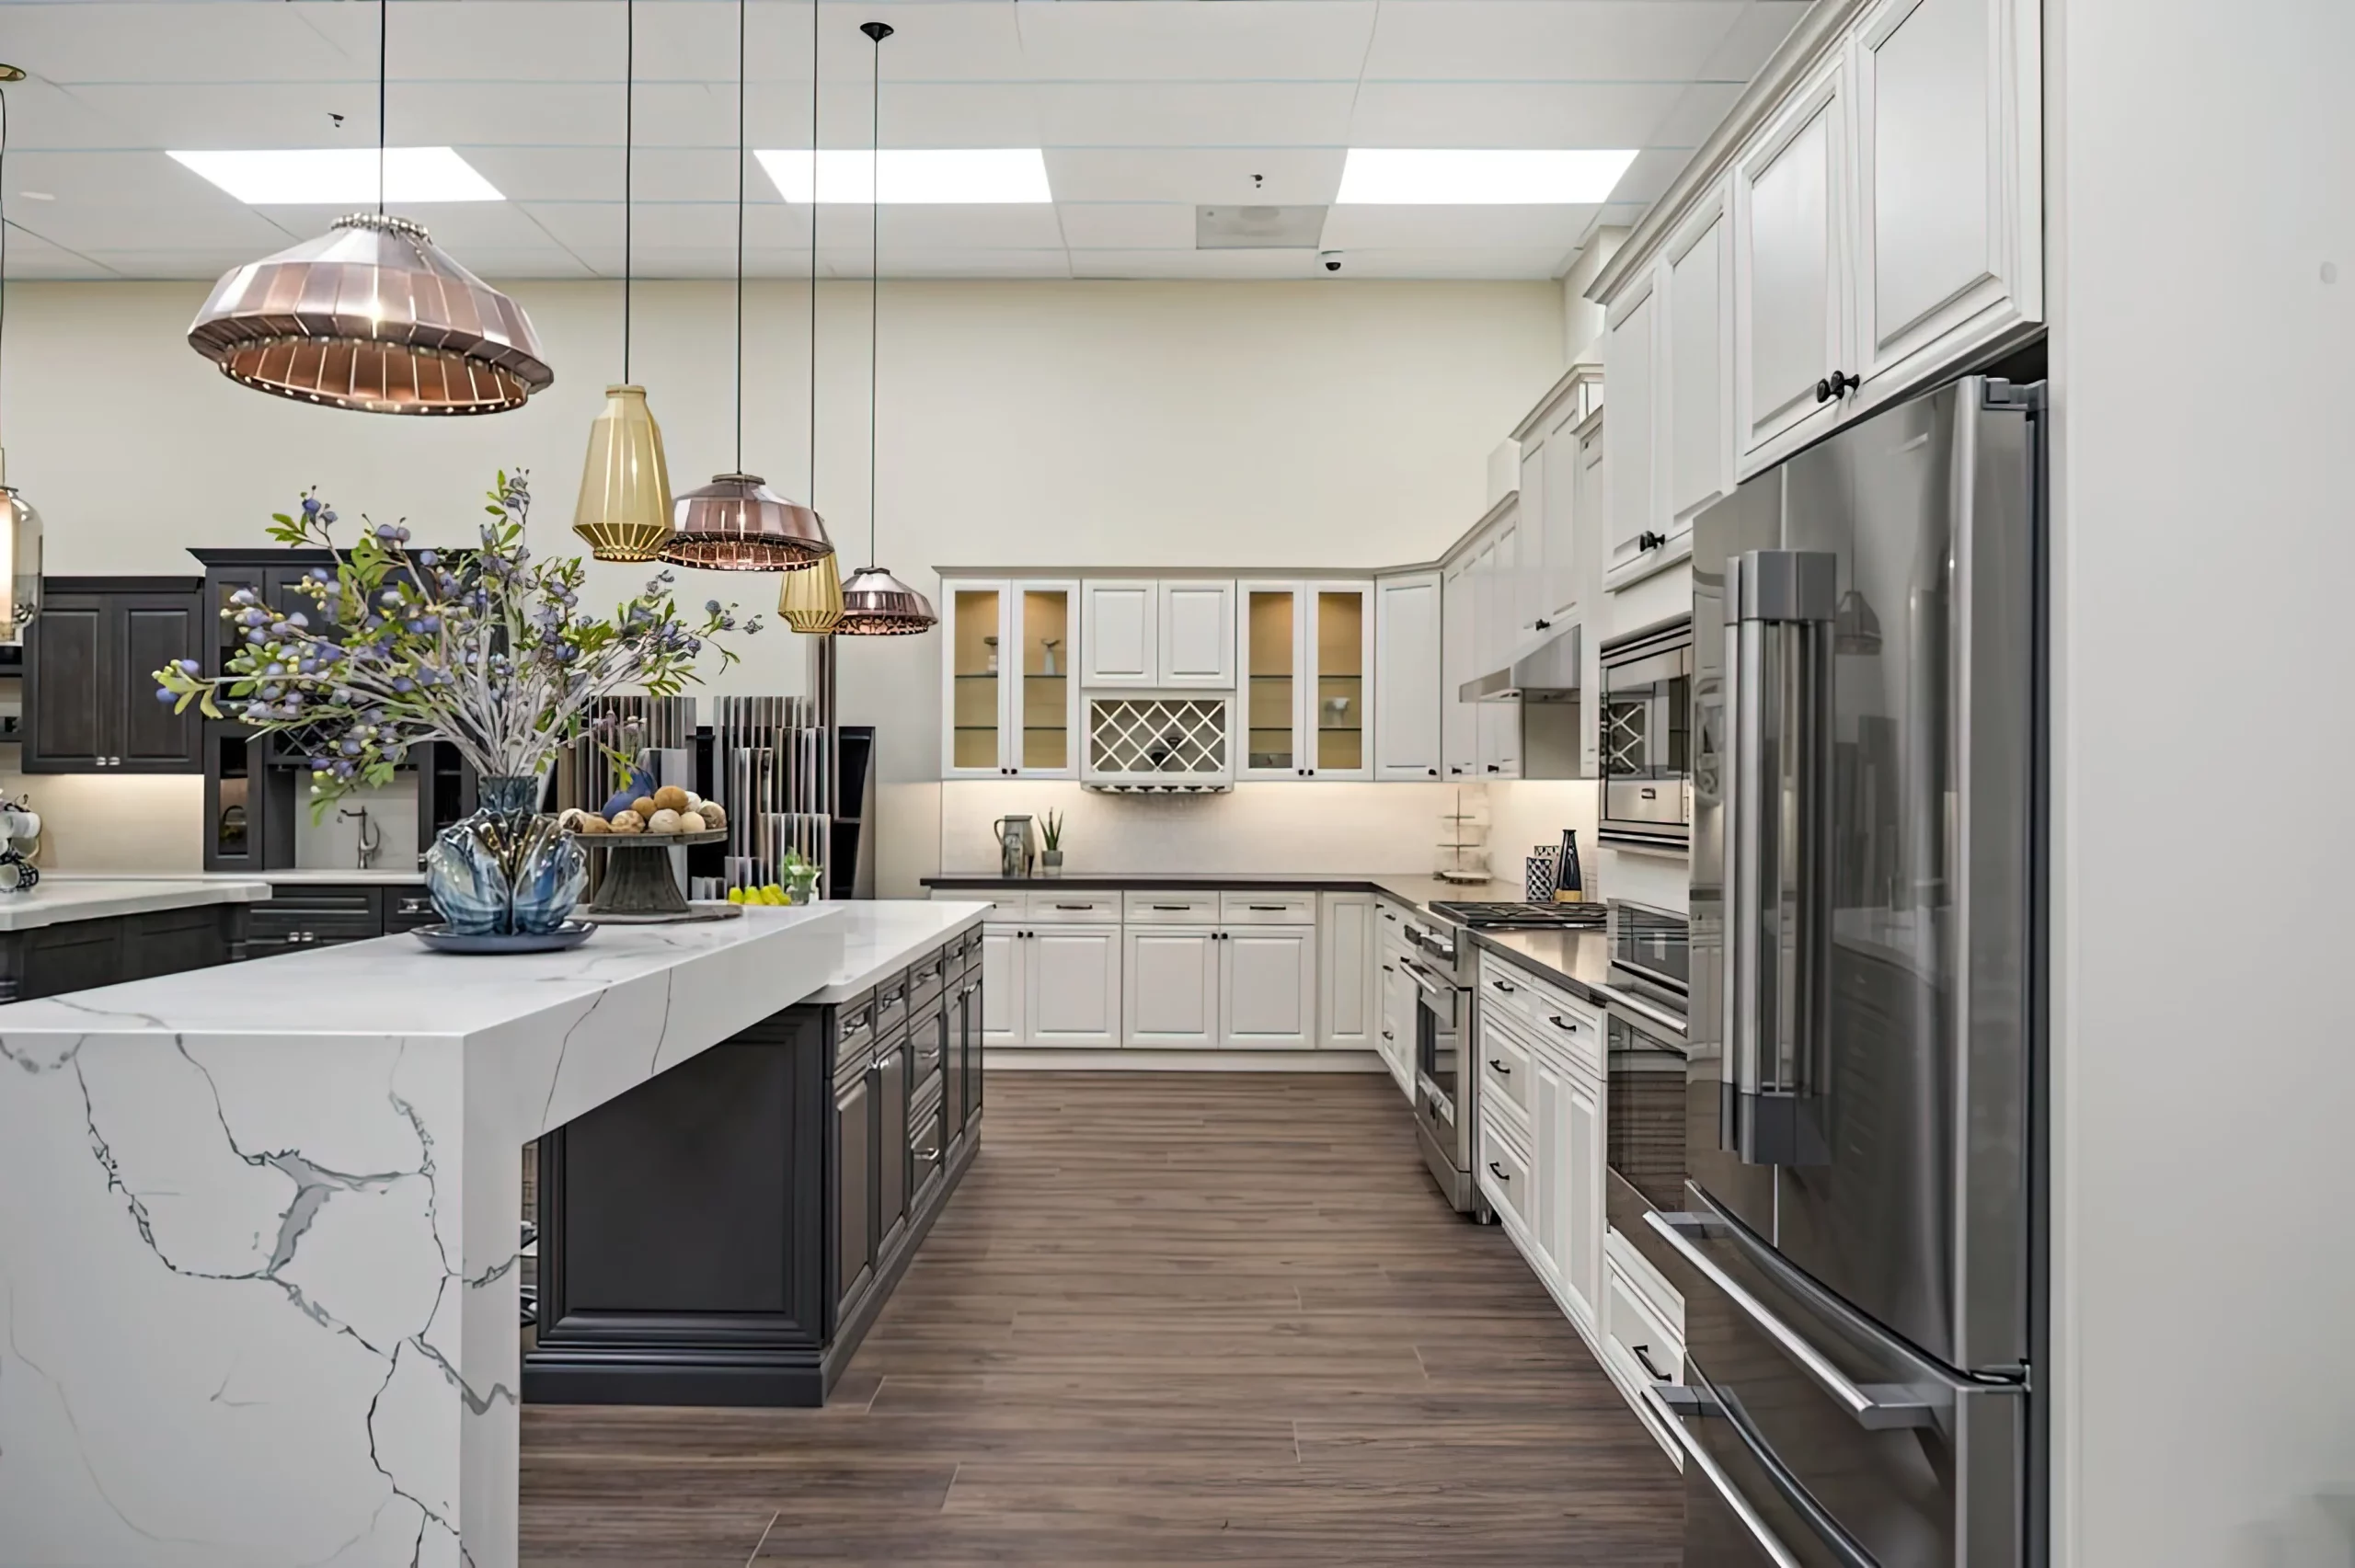 Measuring kitchen cabinets is an integral step toward designing a perfect layout. It sounds easy, but without the right tools, you might end up with incorrect measurements